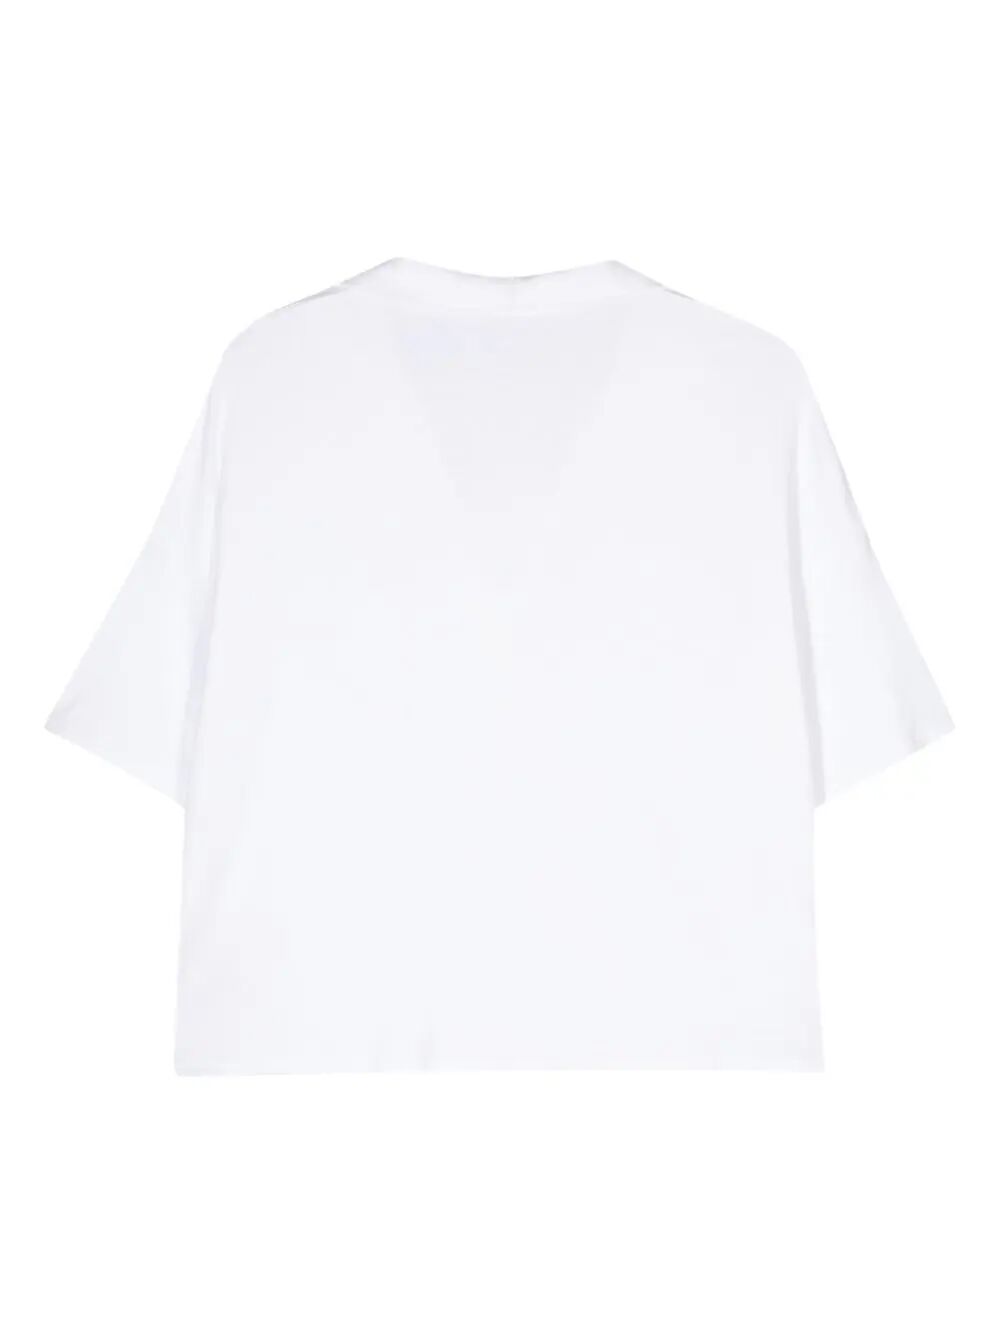 Shop Majestic Short Sleeve Polo In White